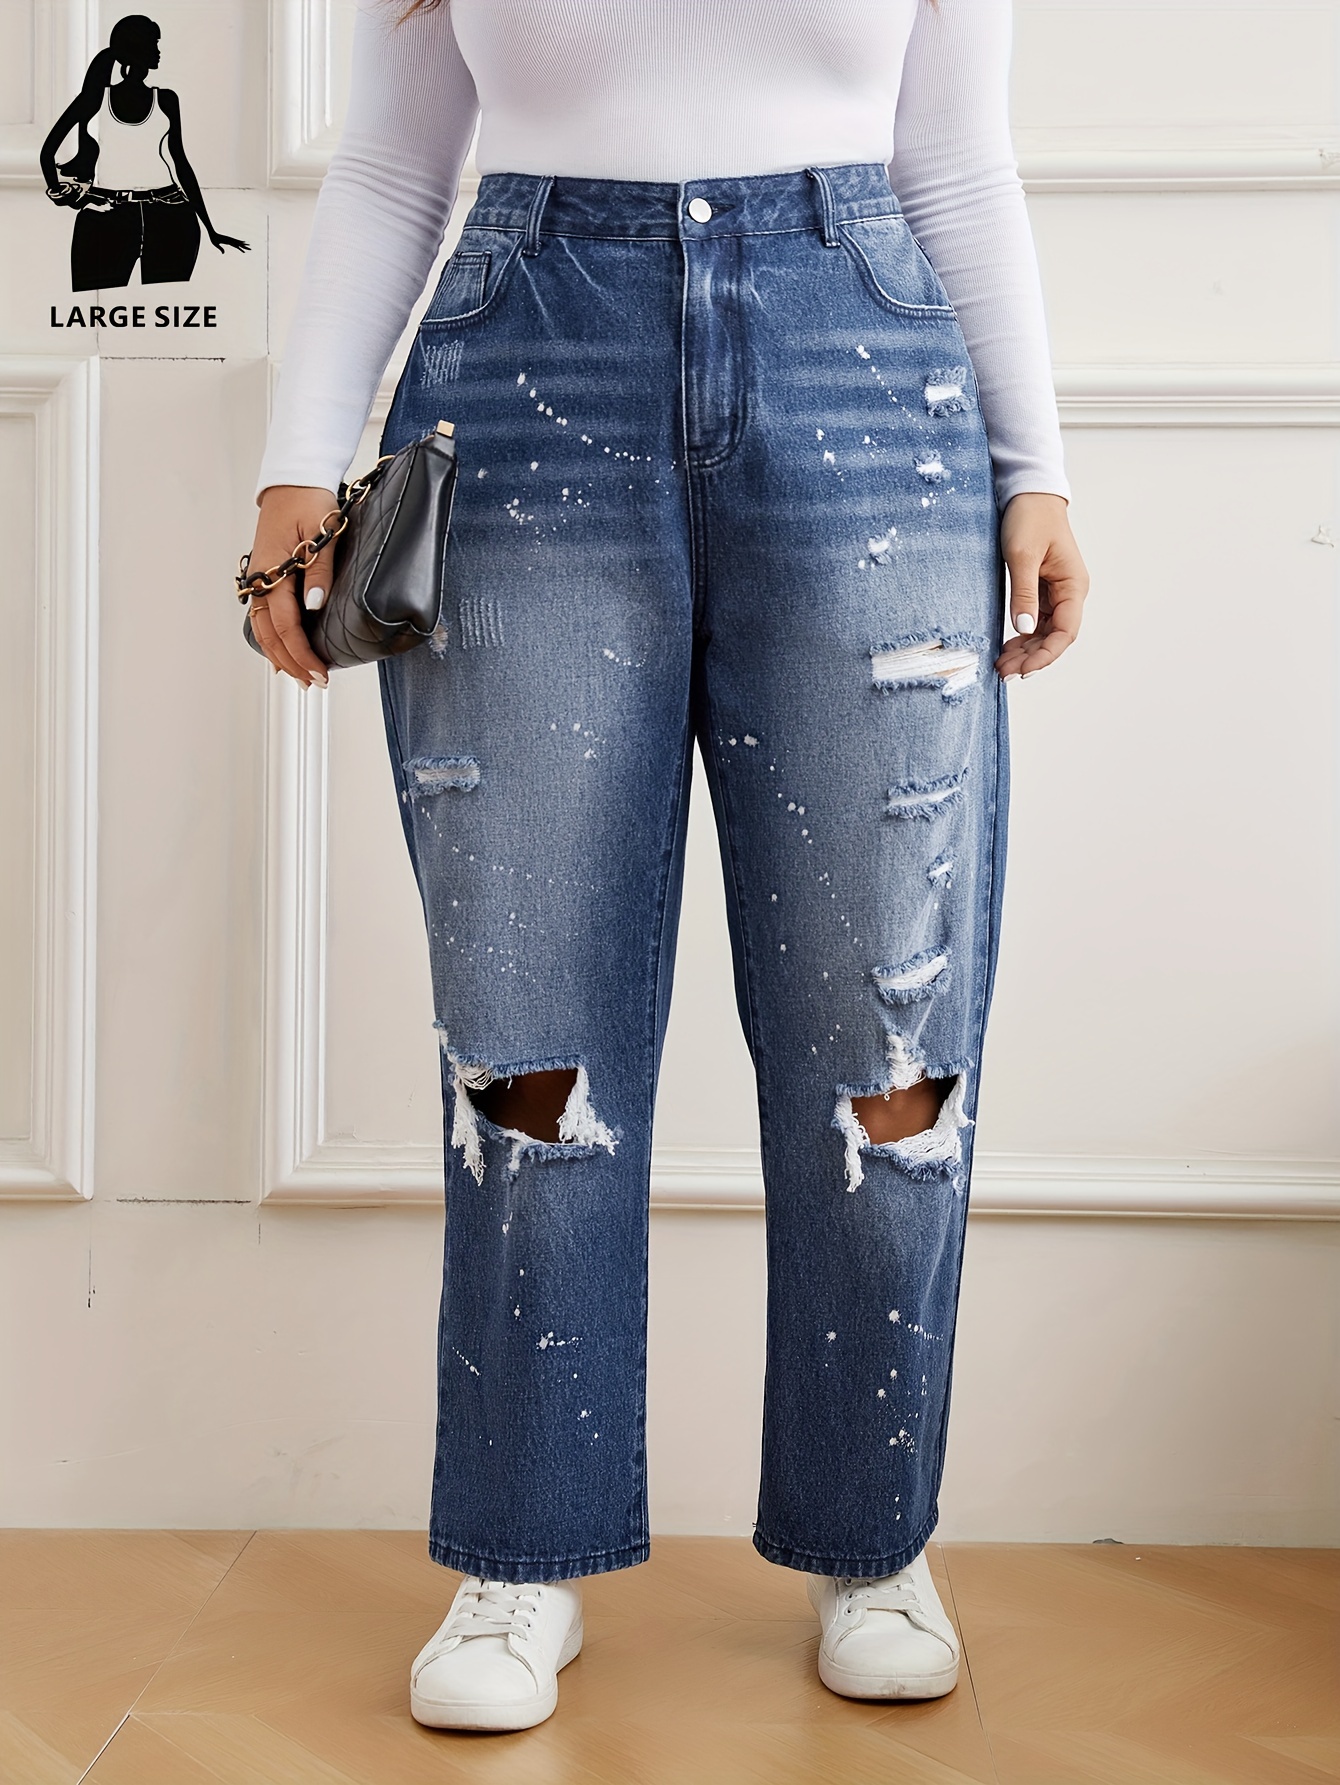 Plus Size Casual Jeans, Women's Plus Solid Ripped Button Fly High * Wide  Leg Jeans